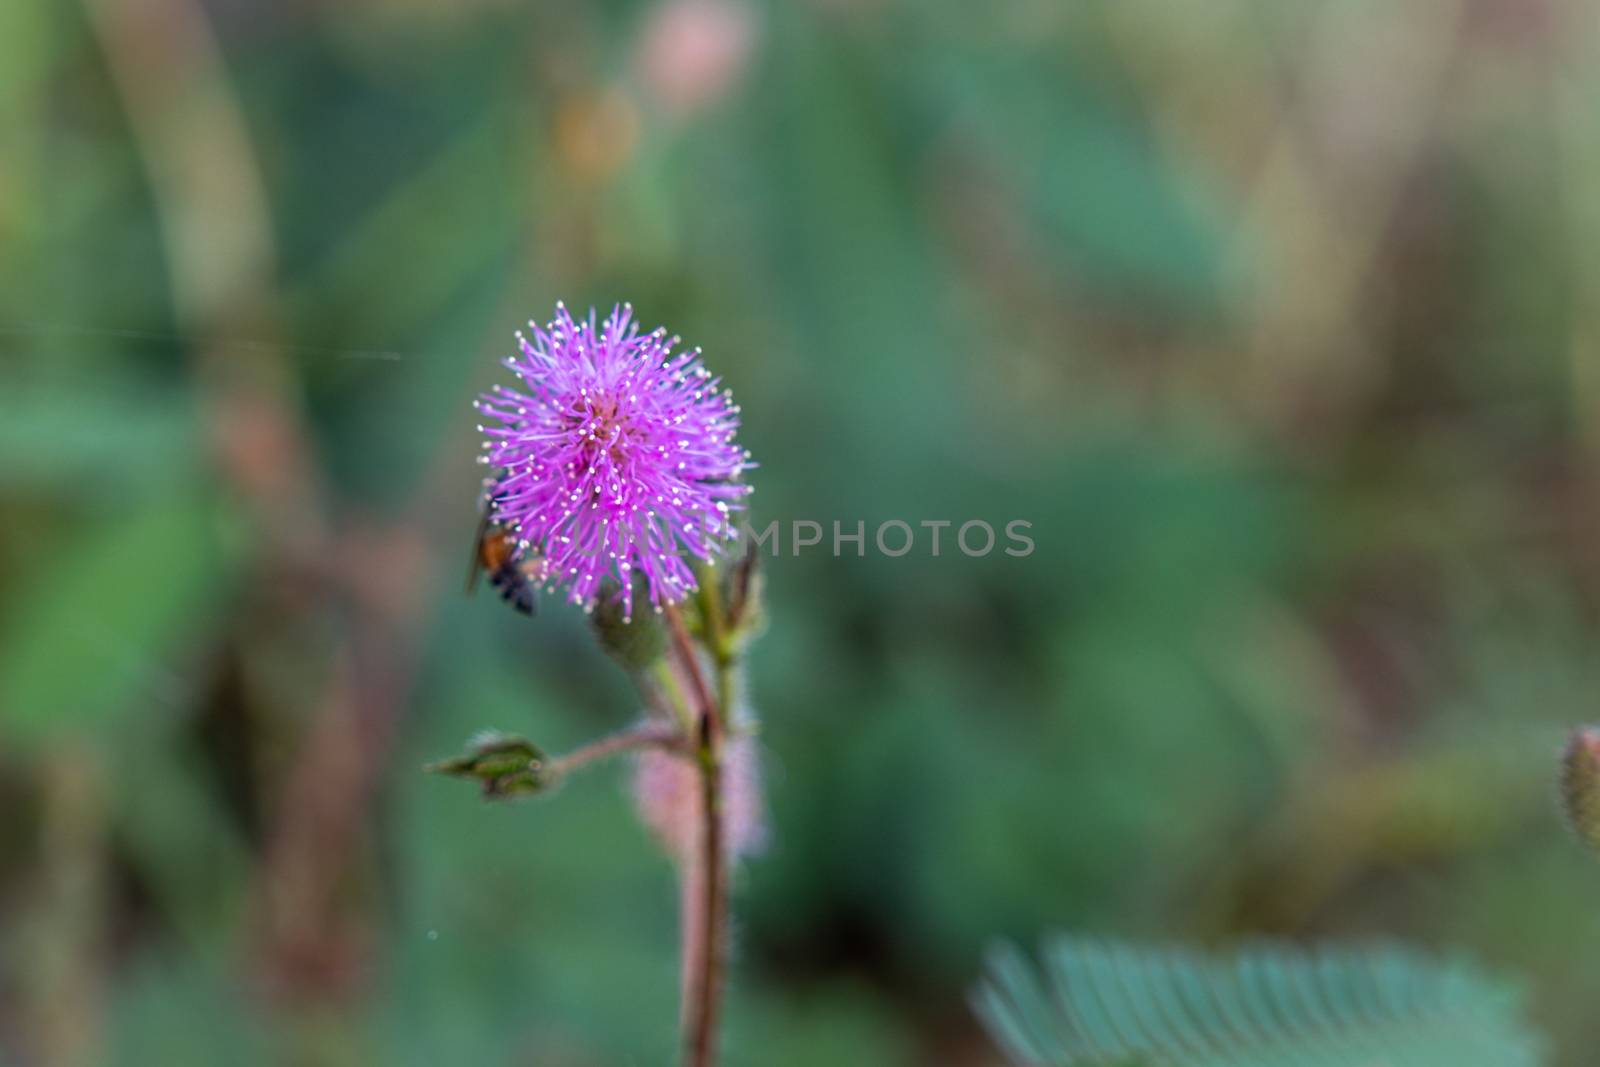 The Closeup to Sensitive Plant Flower, Mimosa Pudica with small bee on blur background